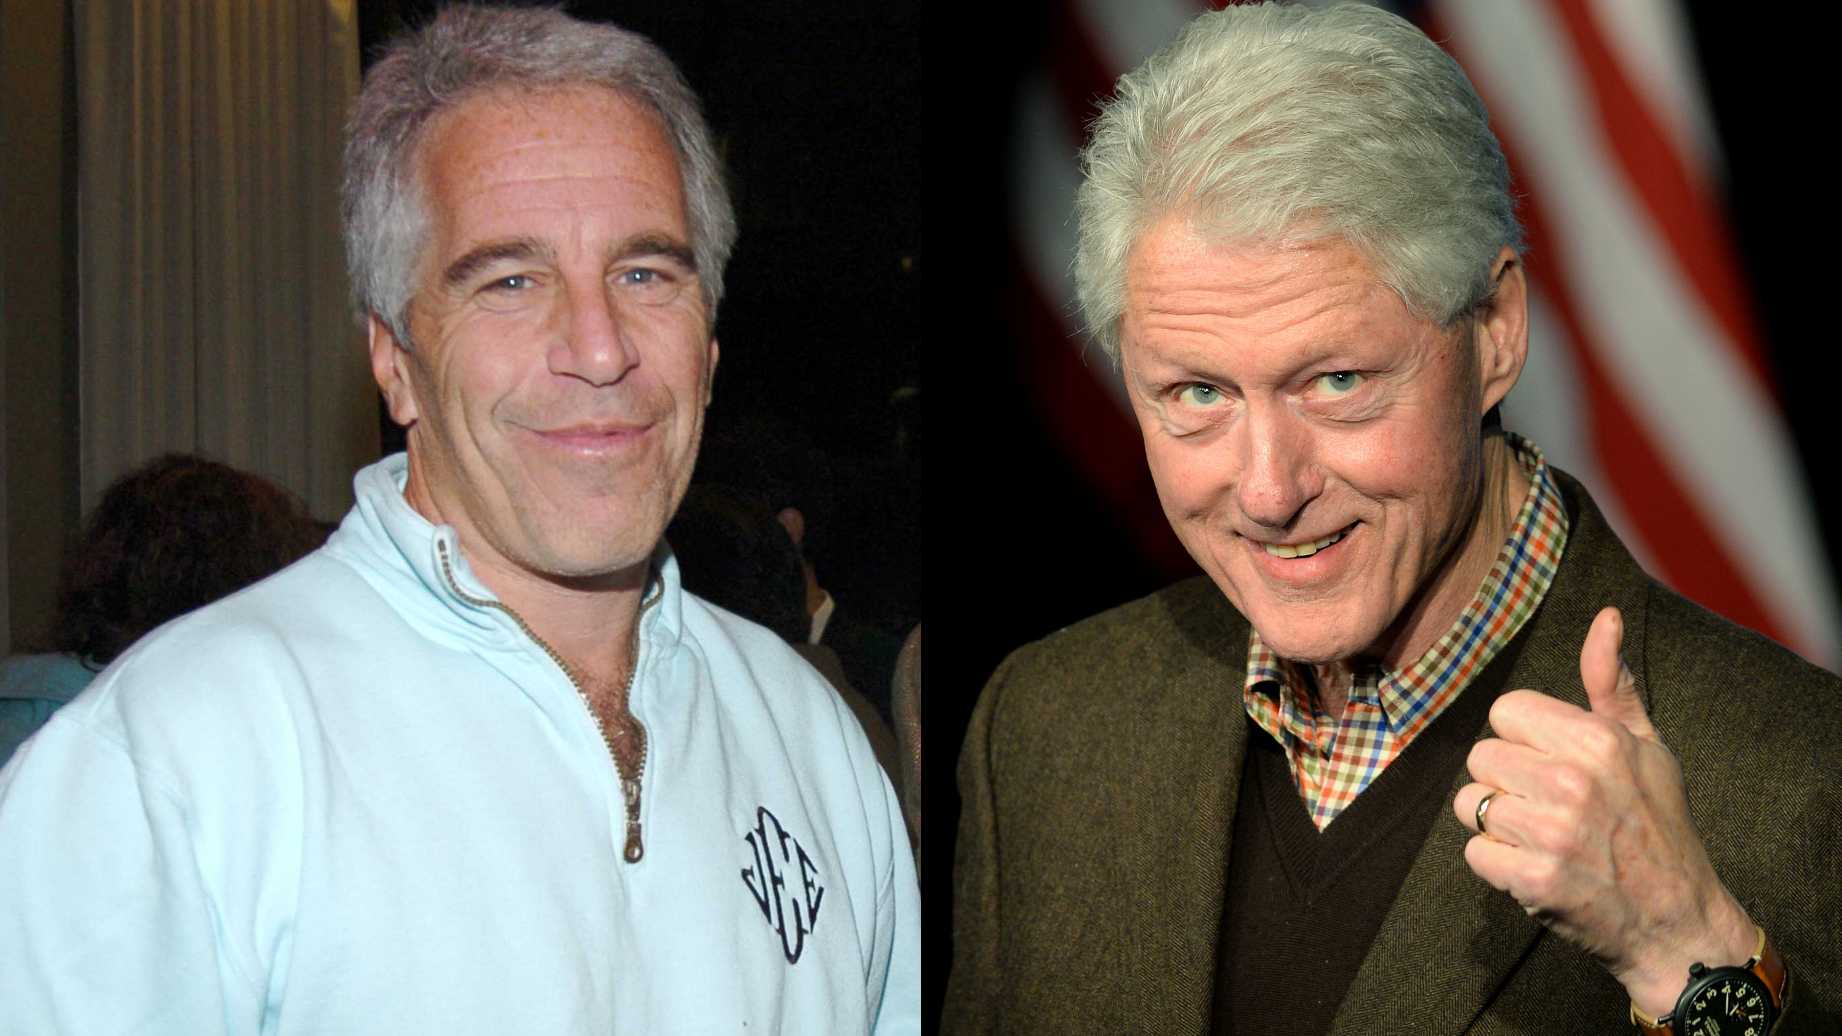 The Elaborate Rescue Of Jeffrey Epstein By The Clintons